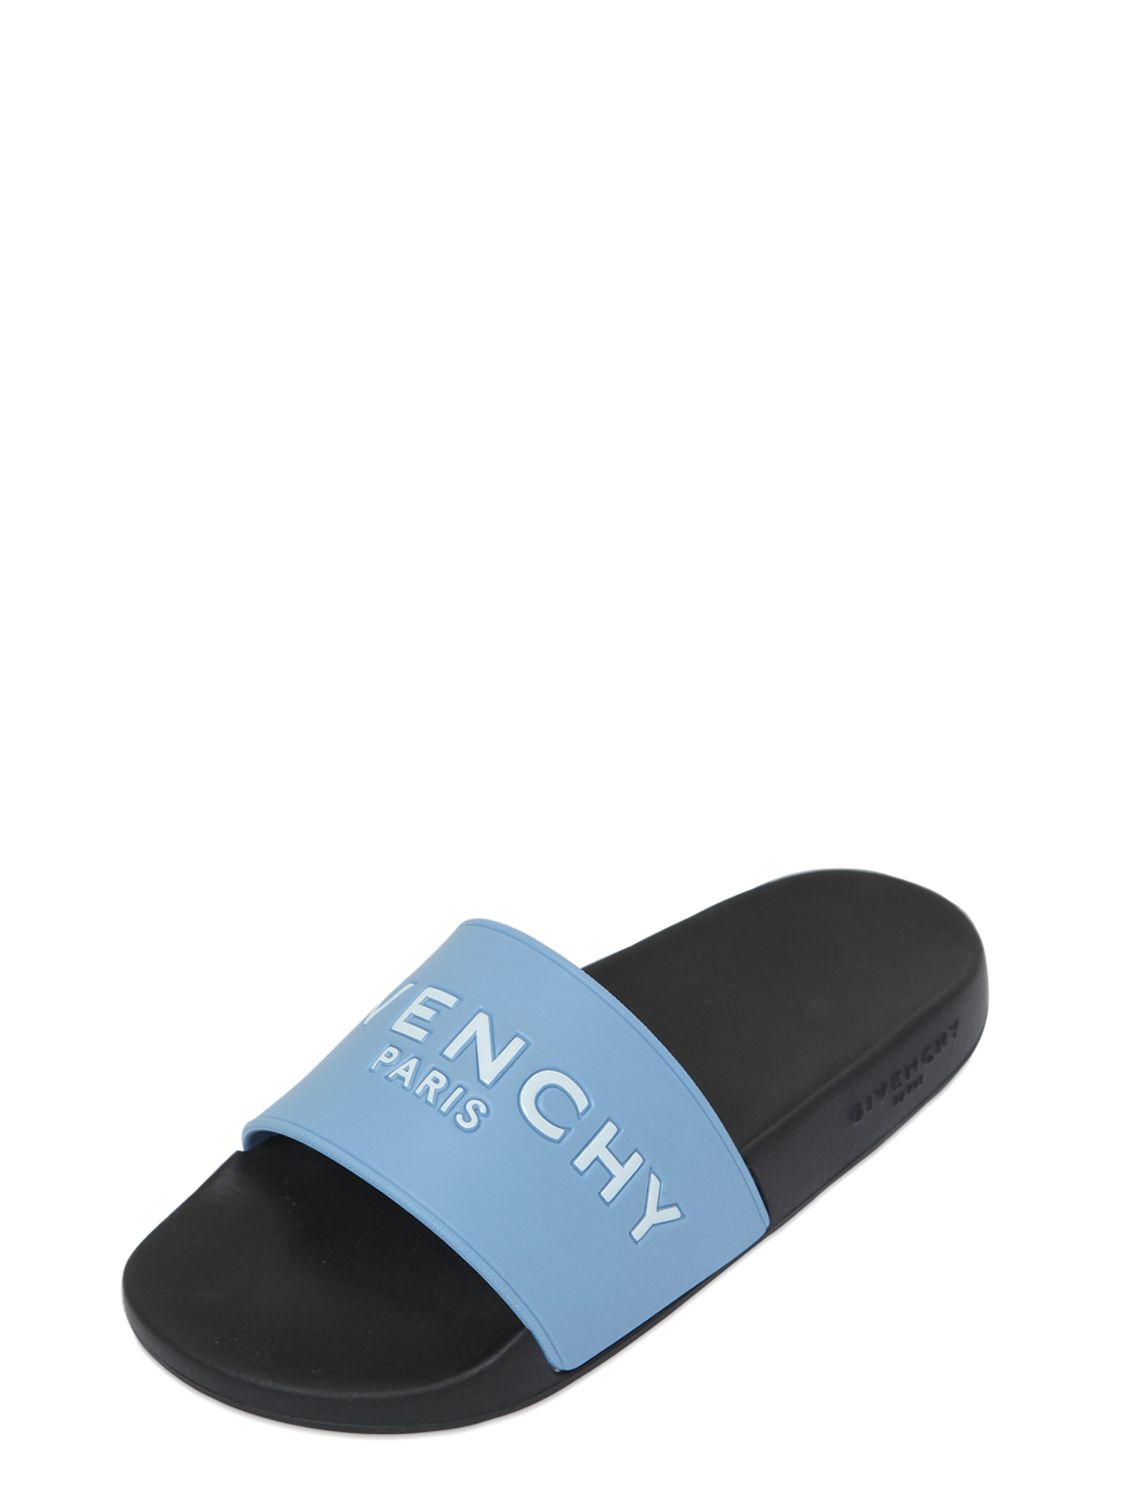 baby blue givenchy slides